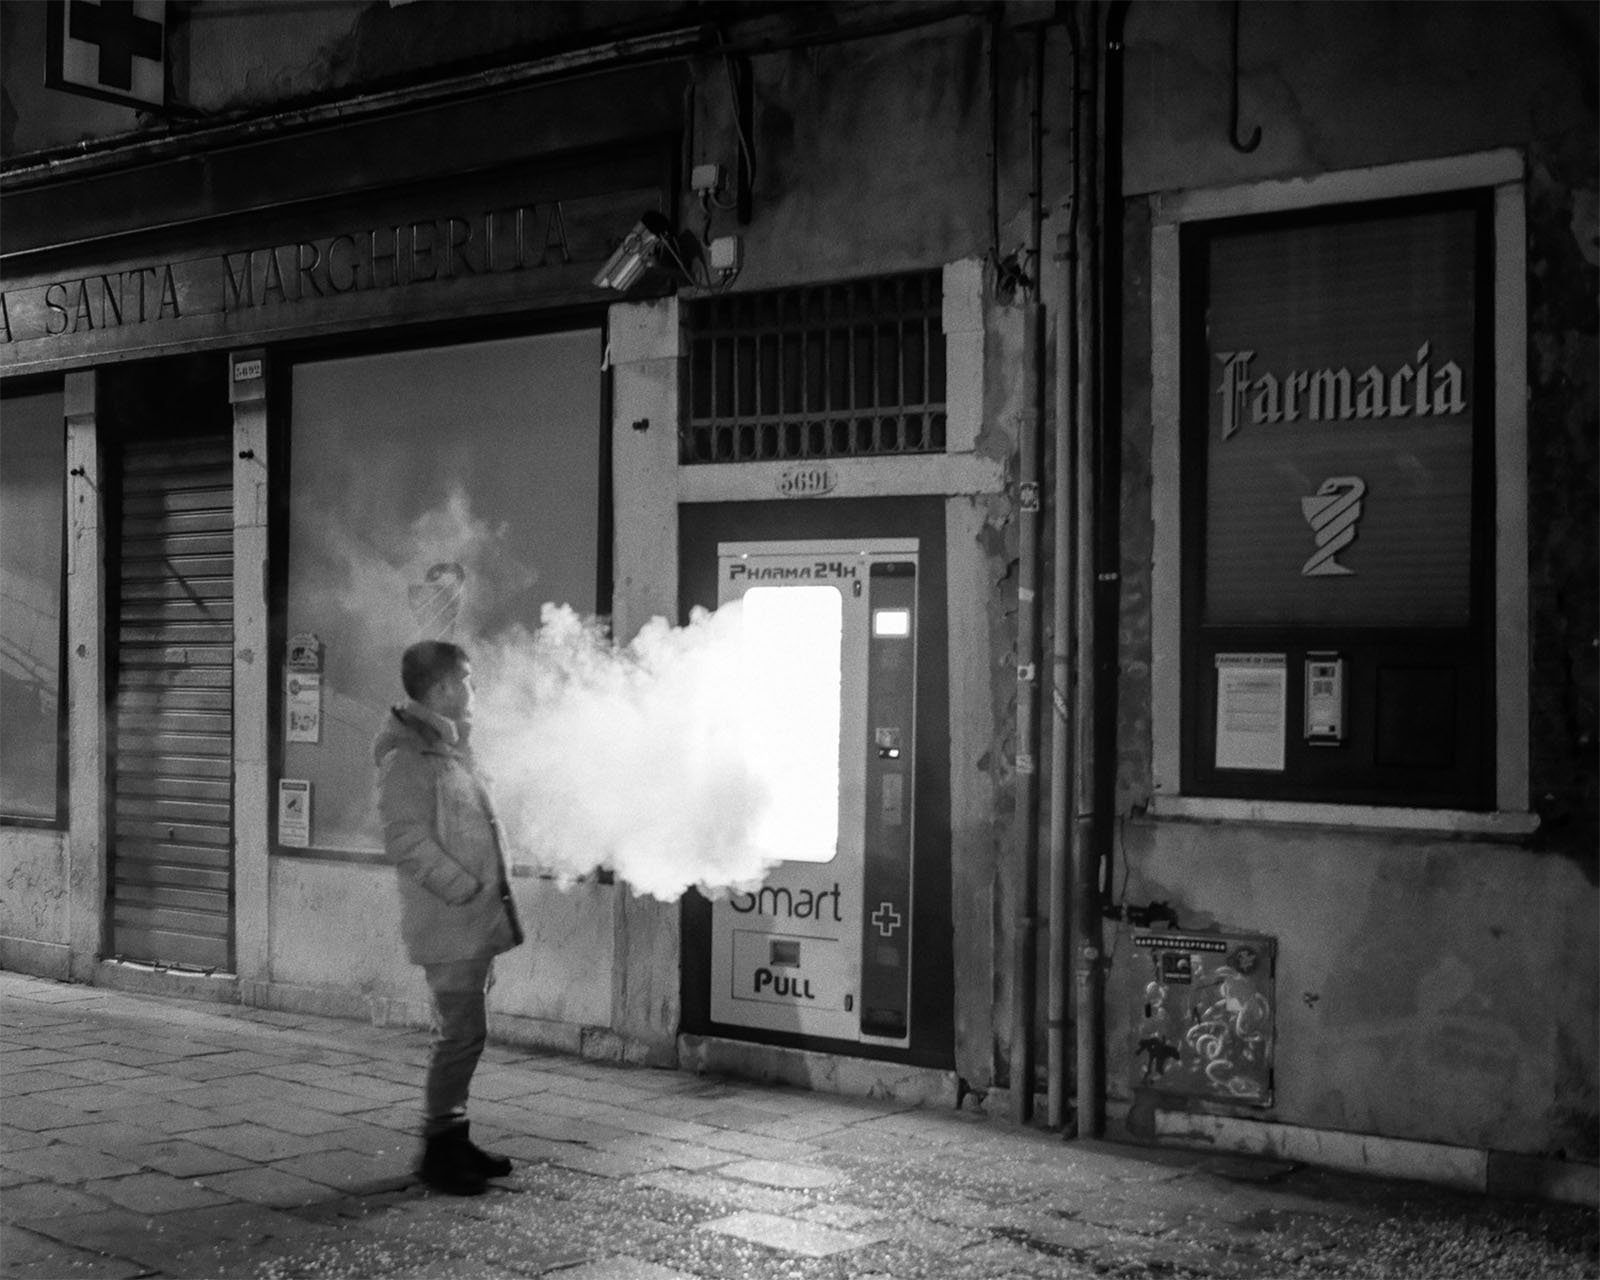 A person stands outside a closed pharmacy on a dimly lit street, exhaling a cloud of vapor. The scene is captured in black and white, emphasizing the contrast between the illuminated storefronts and the dark surroundings.